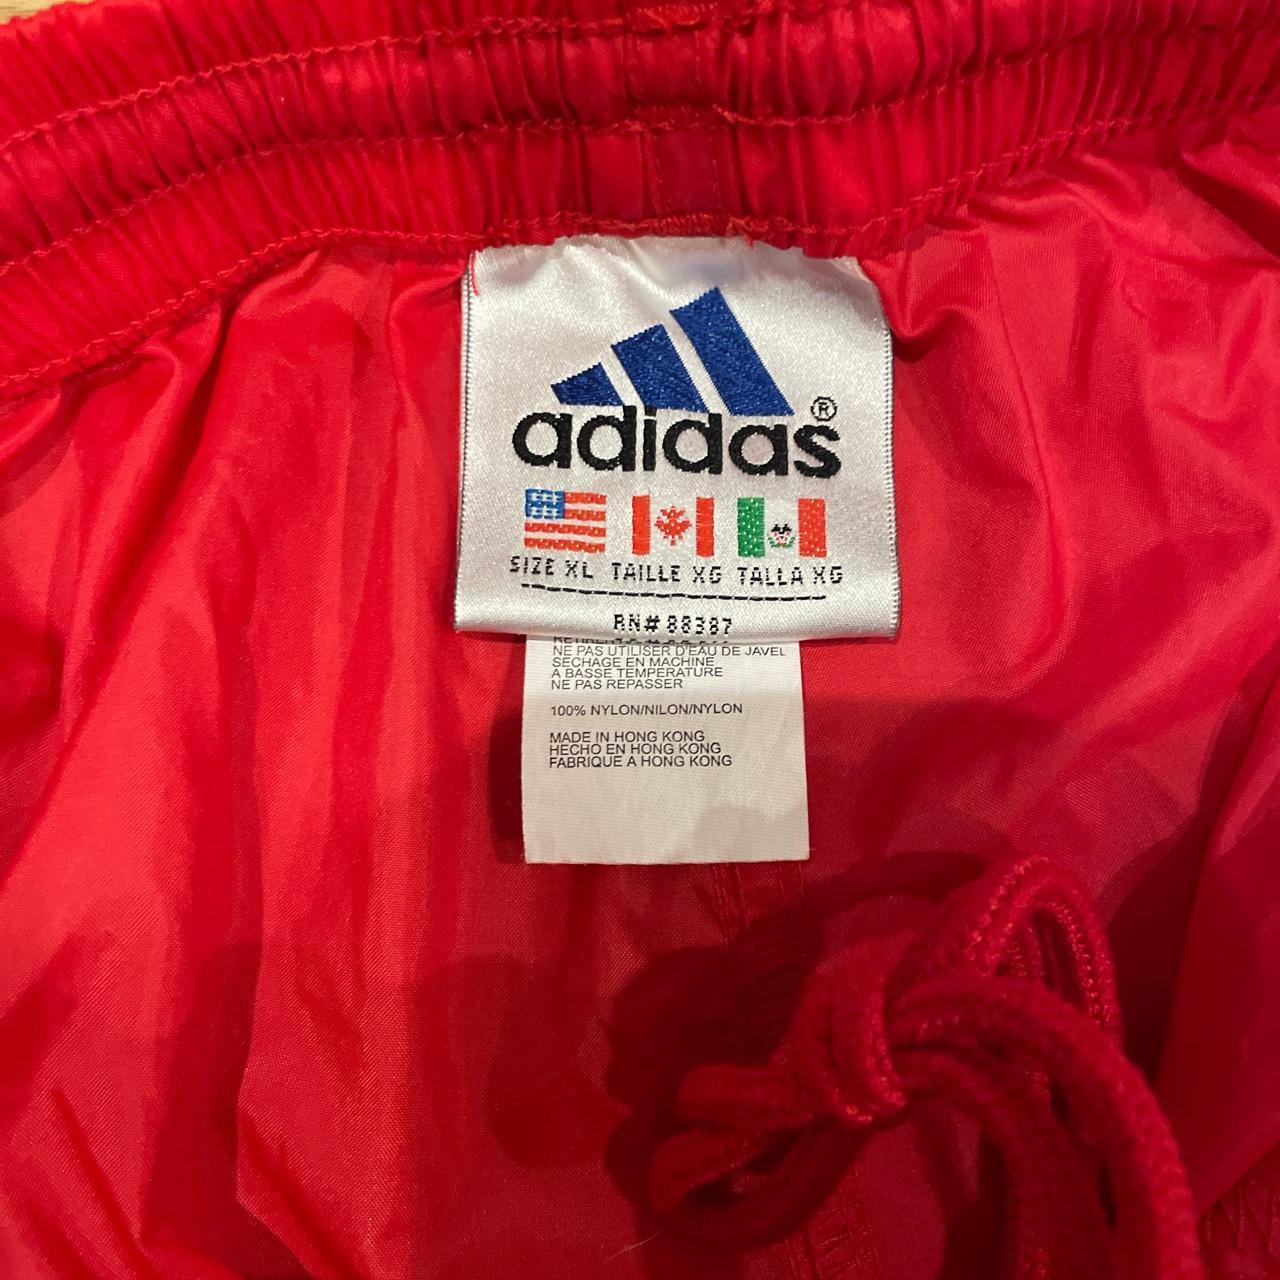 Vintage 90s adidas wind pant. Like new condition, - Depop